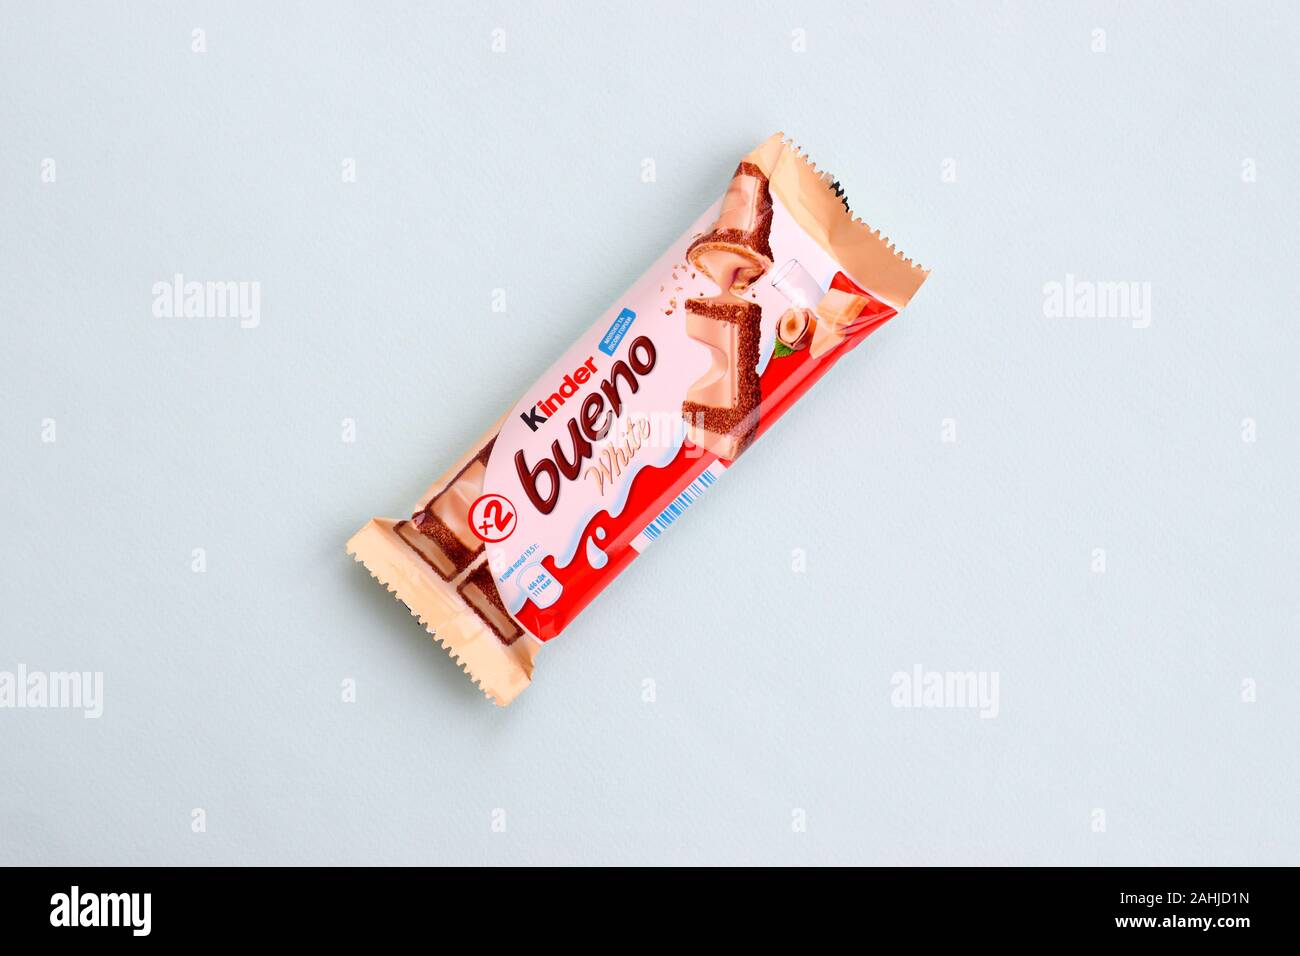 https://c8.alamy.com/comp/2AHJD1N/ny-usa-december-15-2019-kinder-bueno-white-chocolate-is-a-confectionery-product-brand-line-of-italian-confectionery-multinational-manufacturer-fe-2AHJD1N.jpg